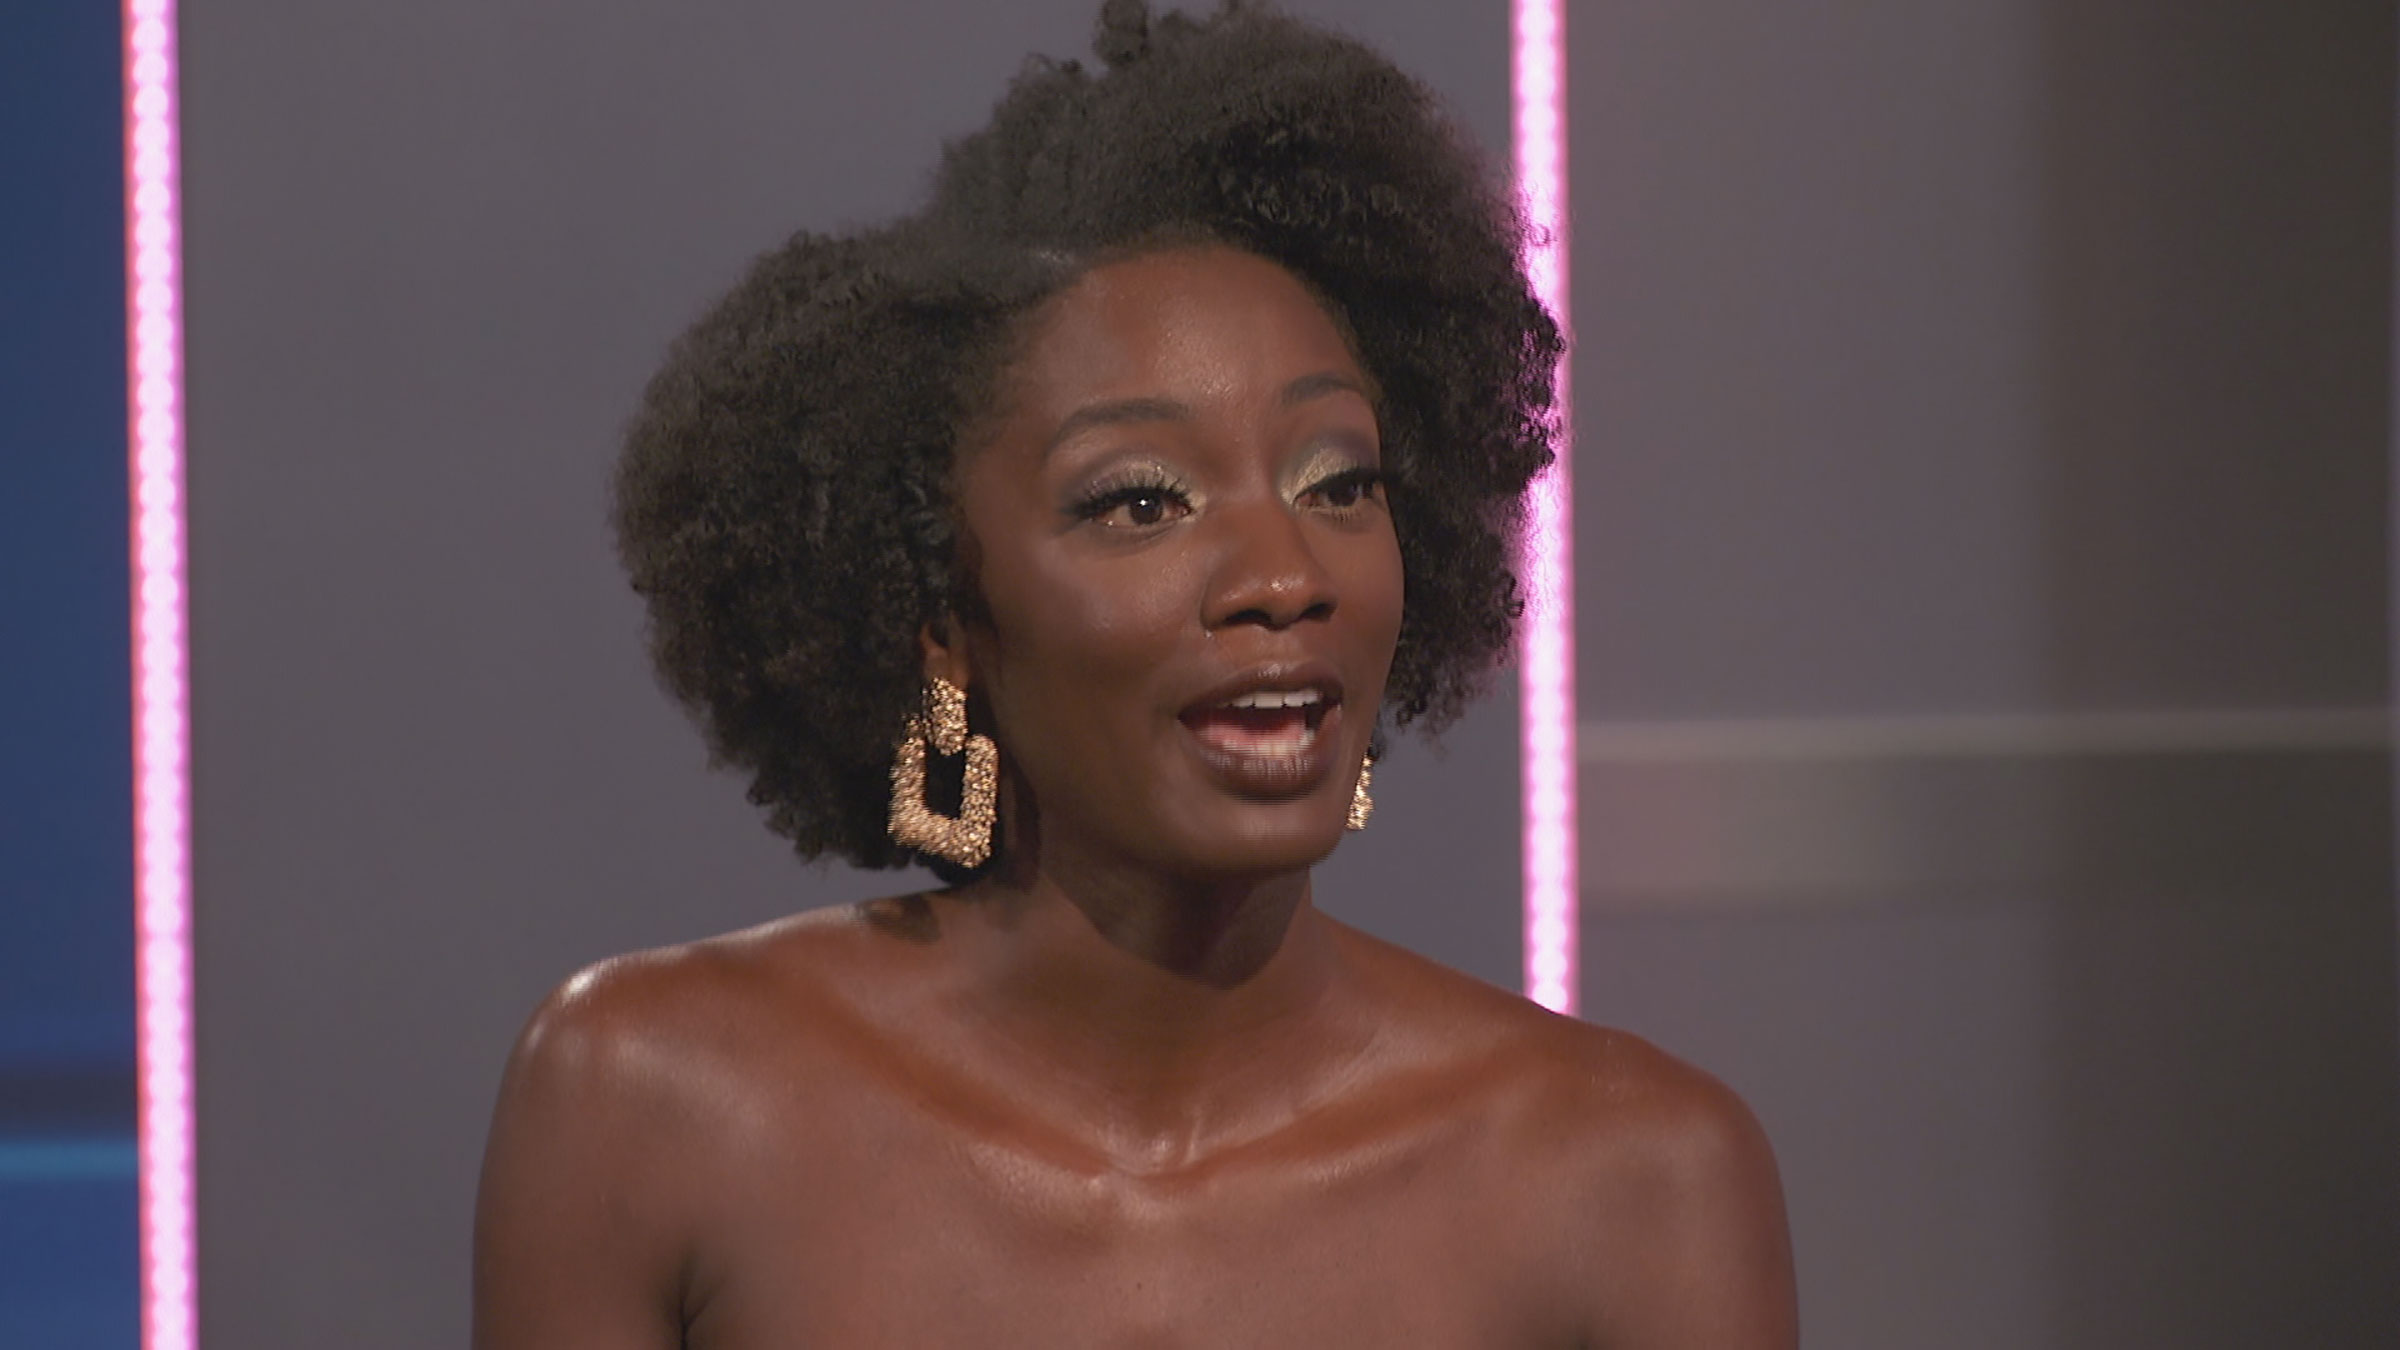 Azah Awasum, one of the Cookout members, on the finale of Big Brother (CBS)